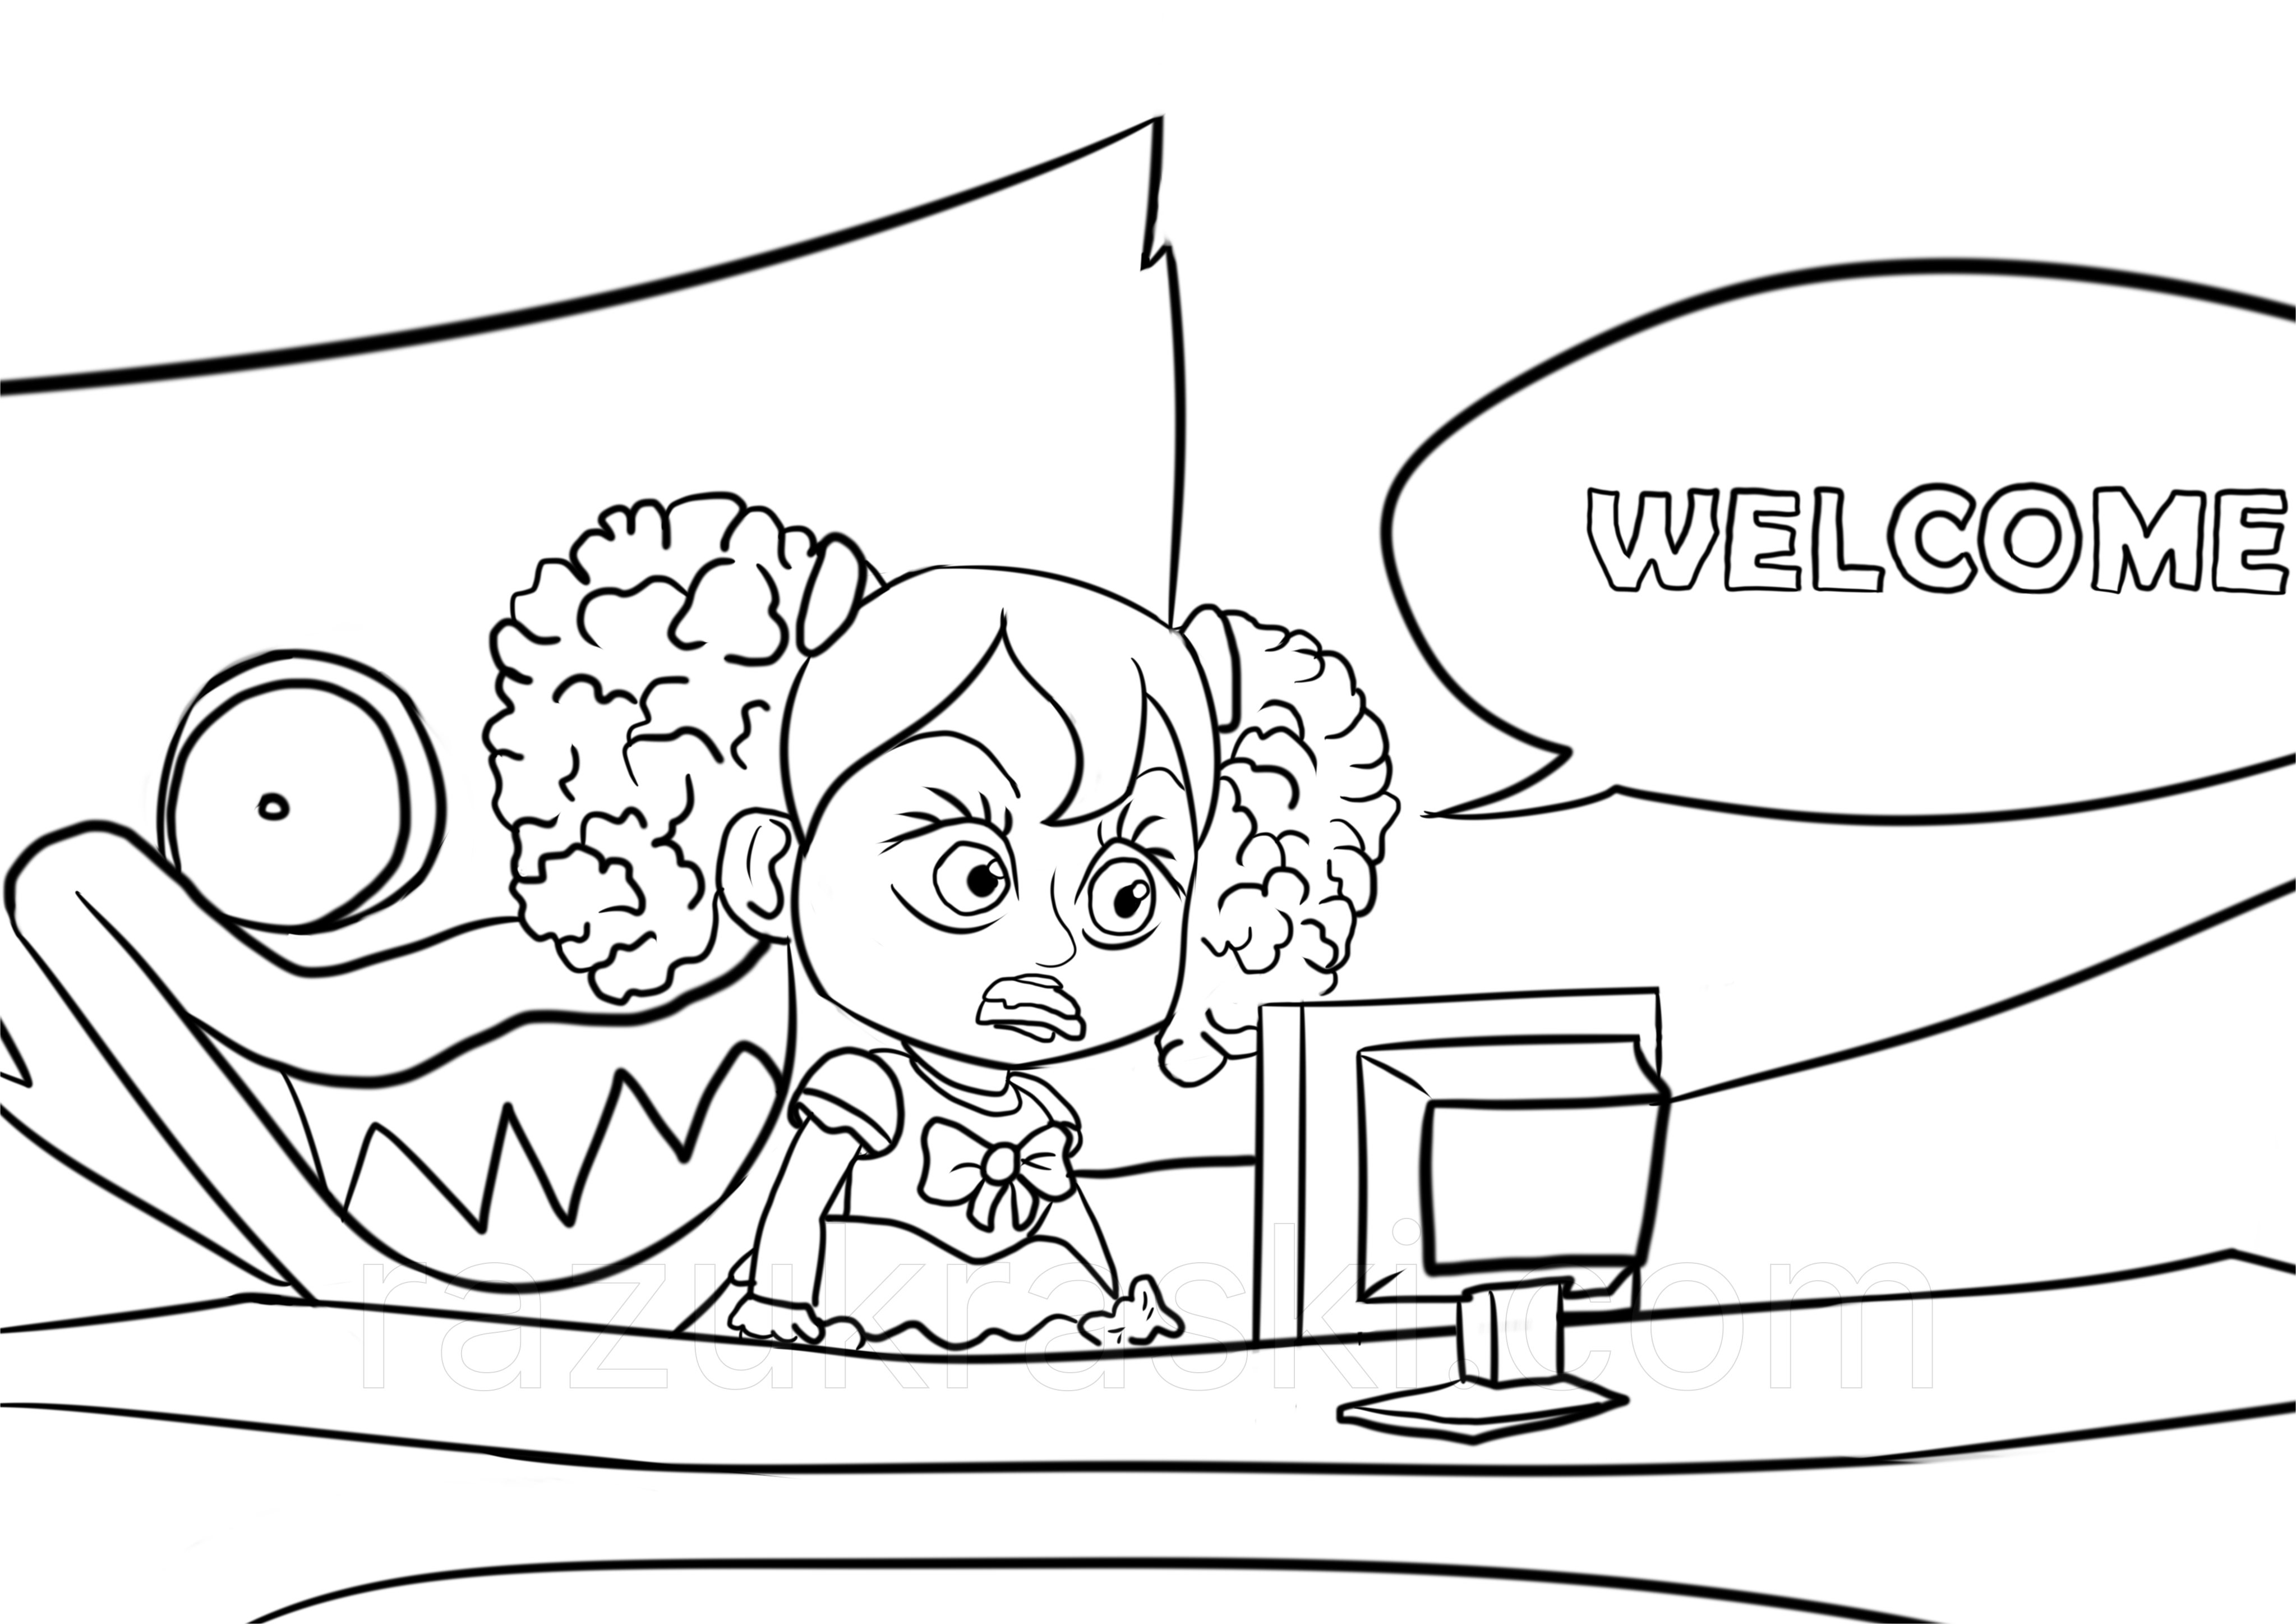 Coloring page Huggy Wuggy Welcome